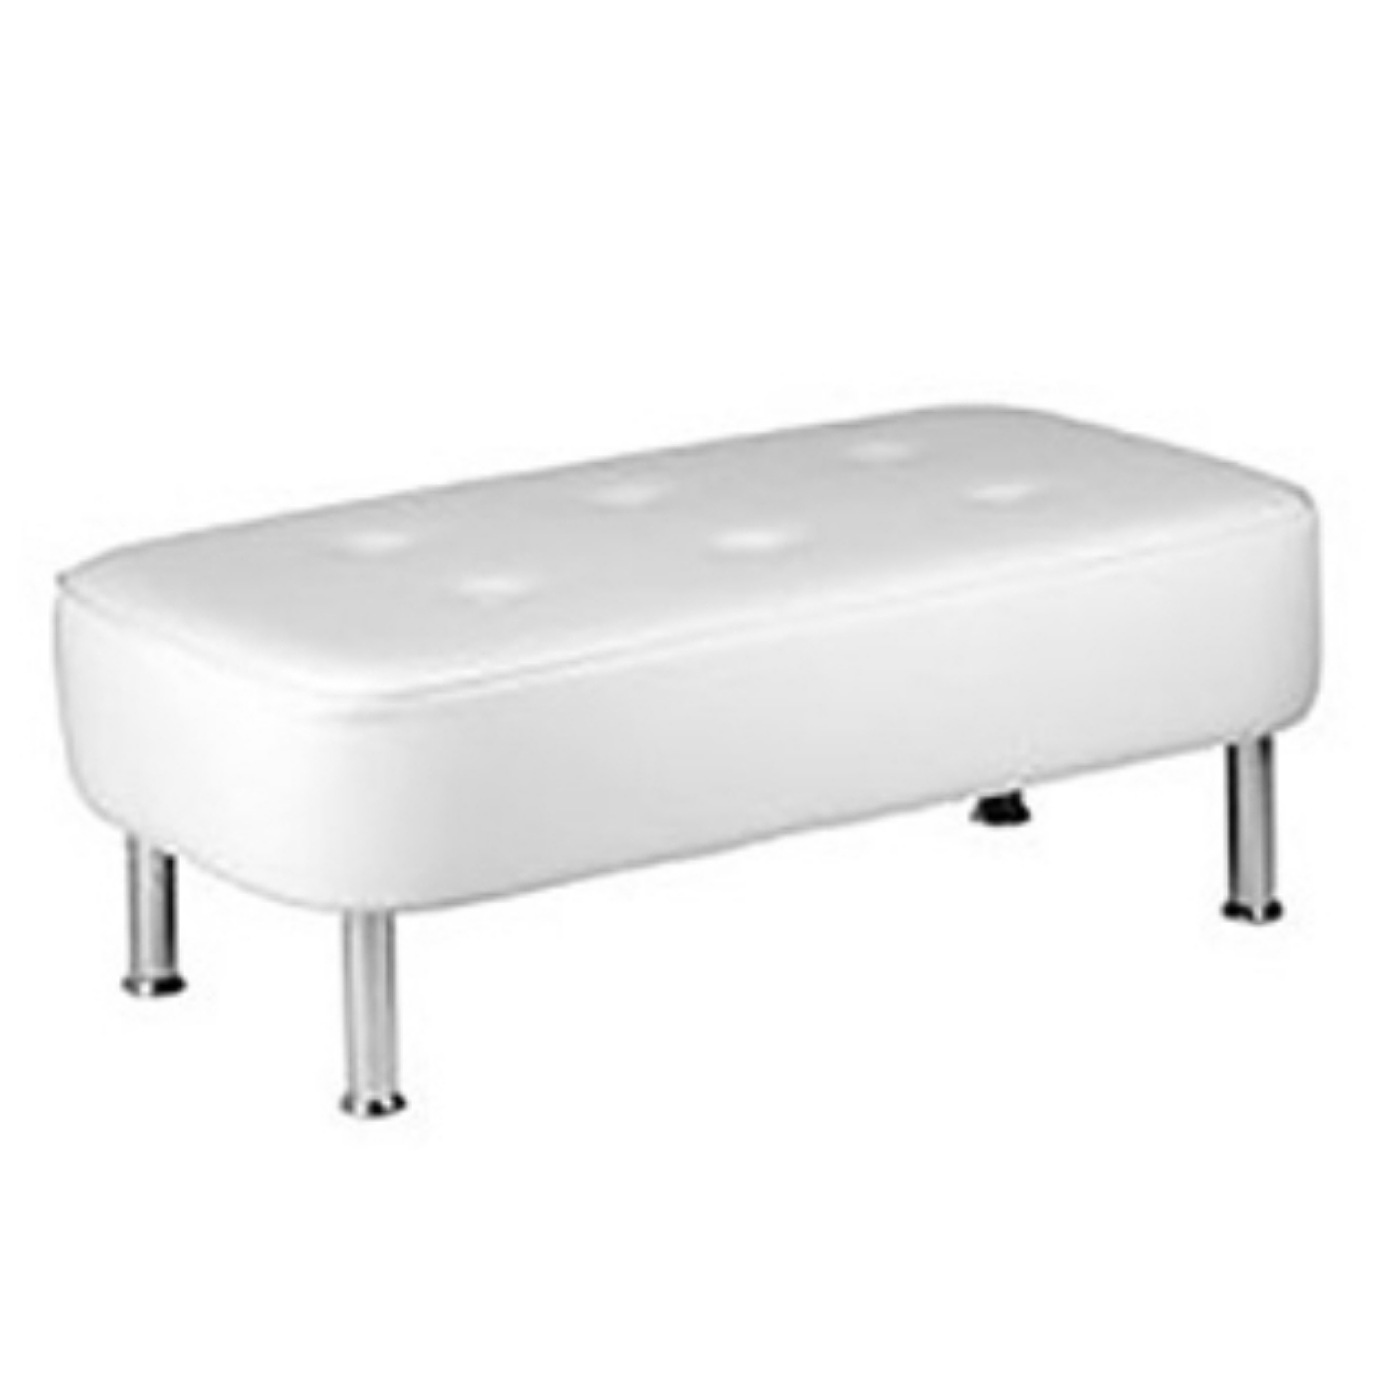 Rectangular White Leather Ottoman With Steel Legs.